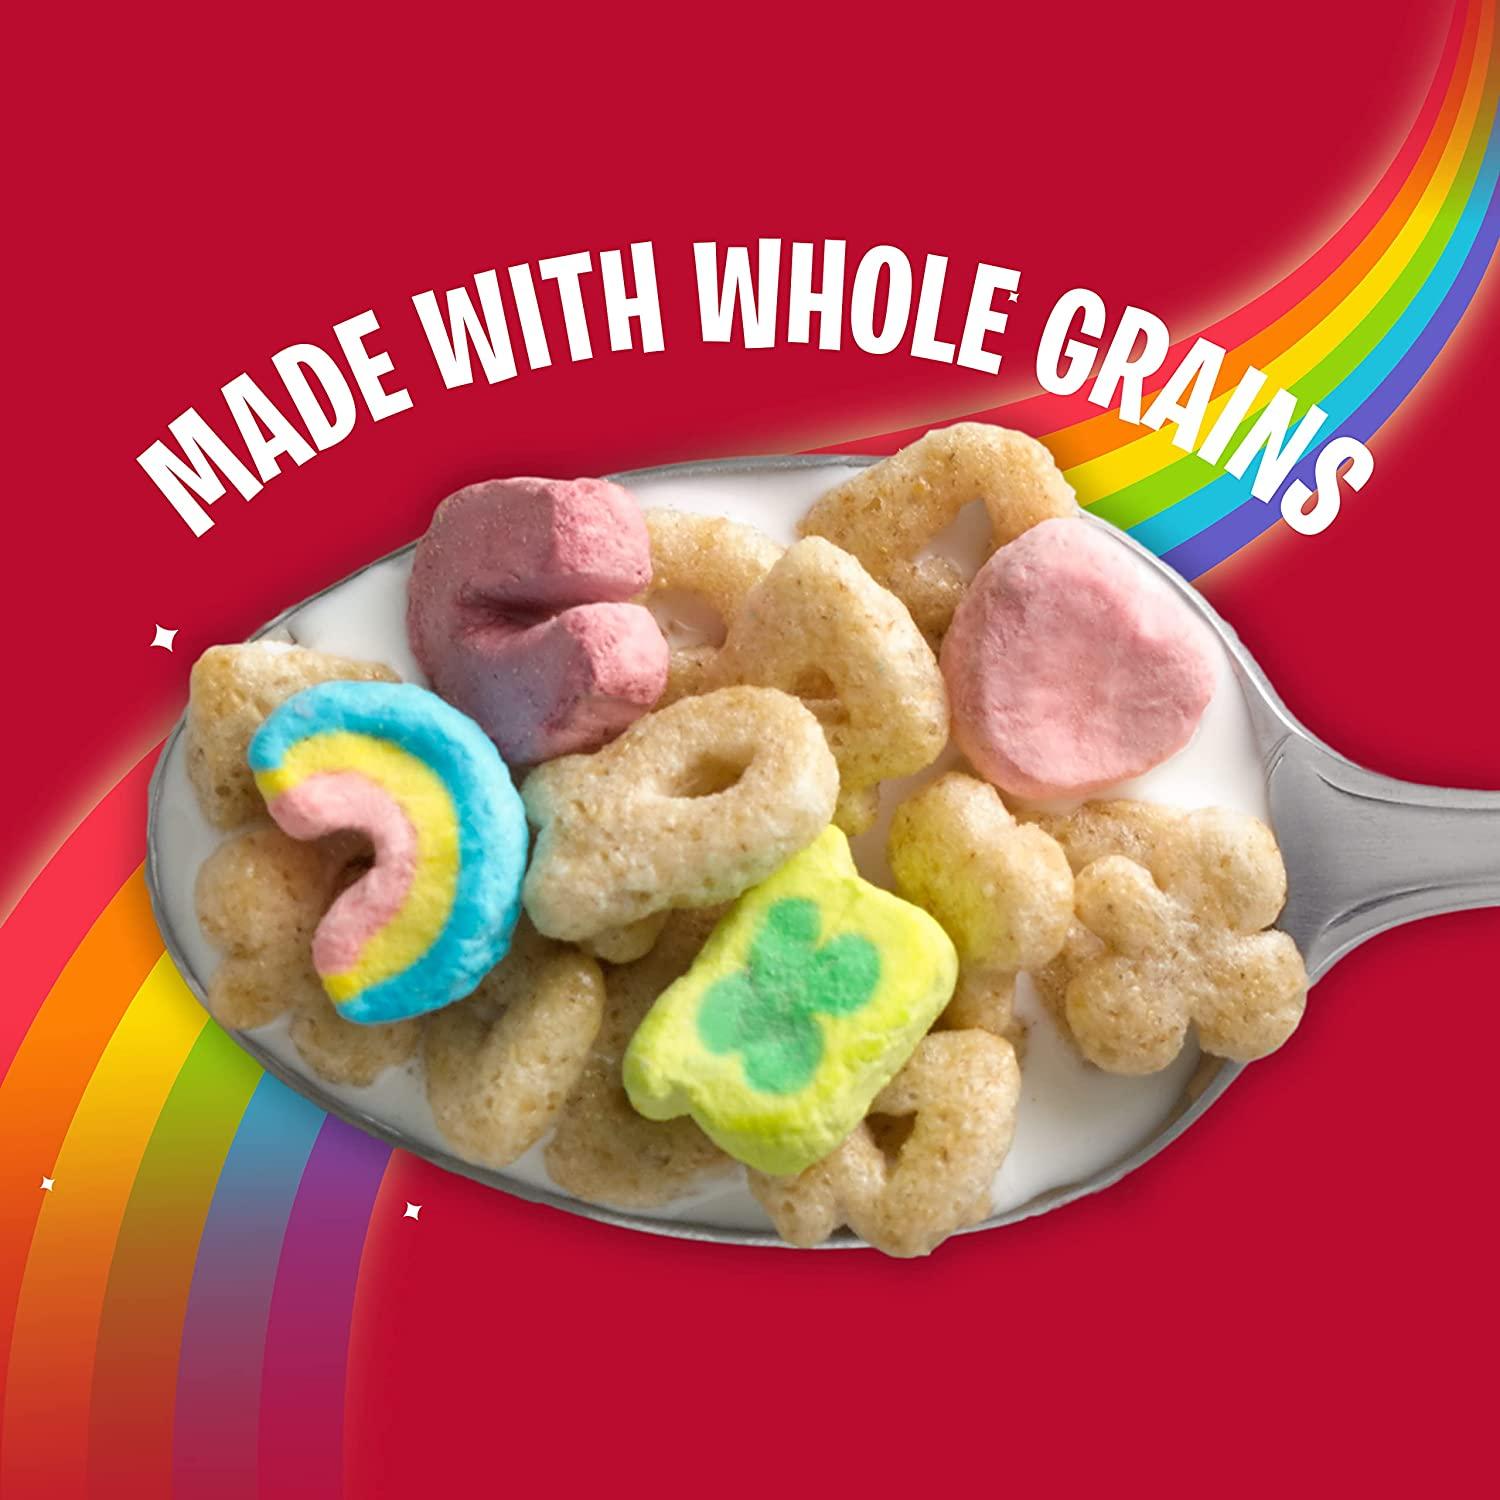 Lucky Charms Gluten Free Breakfast Cereal 10.5 oz